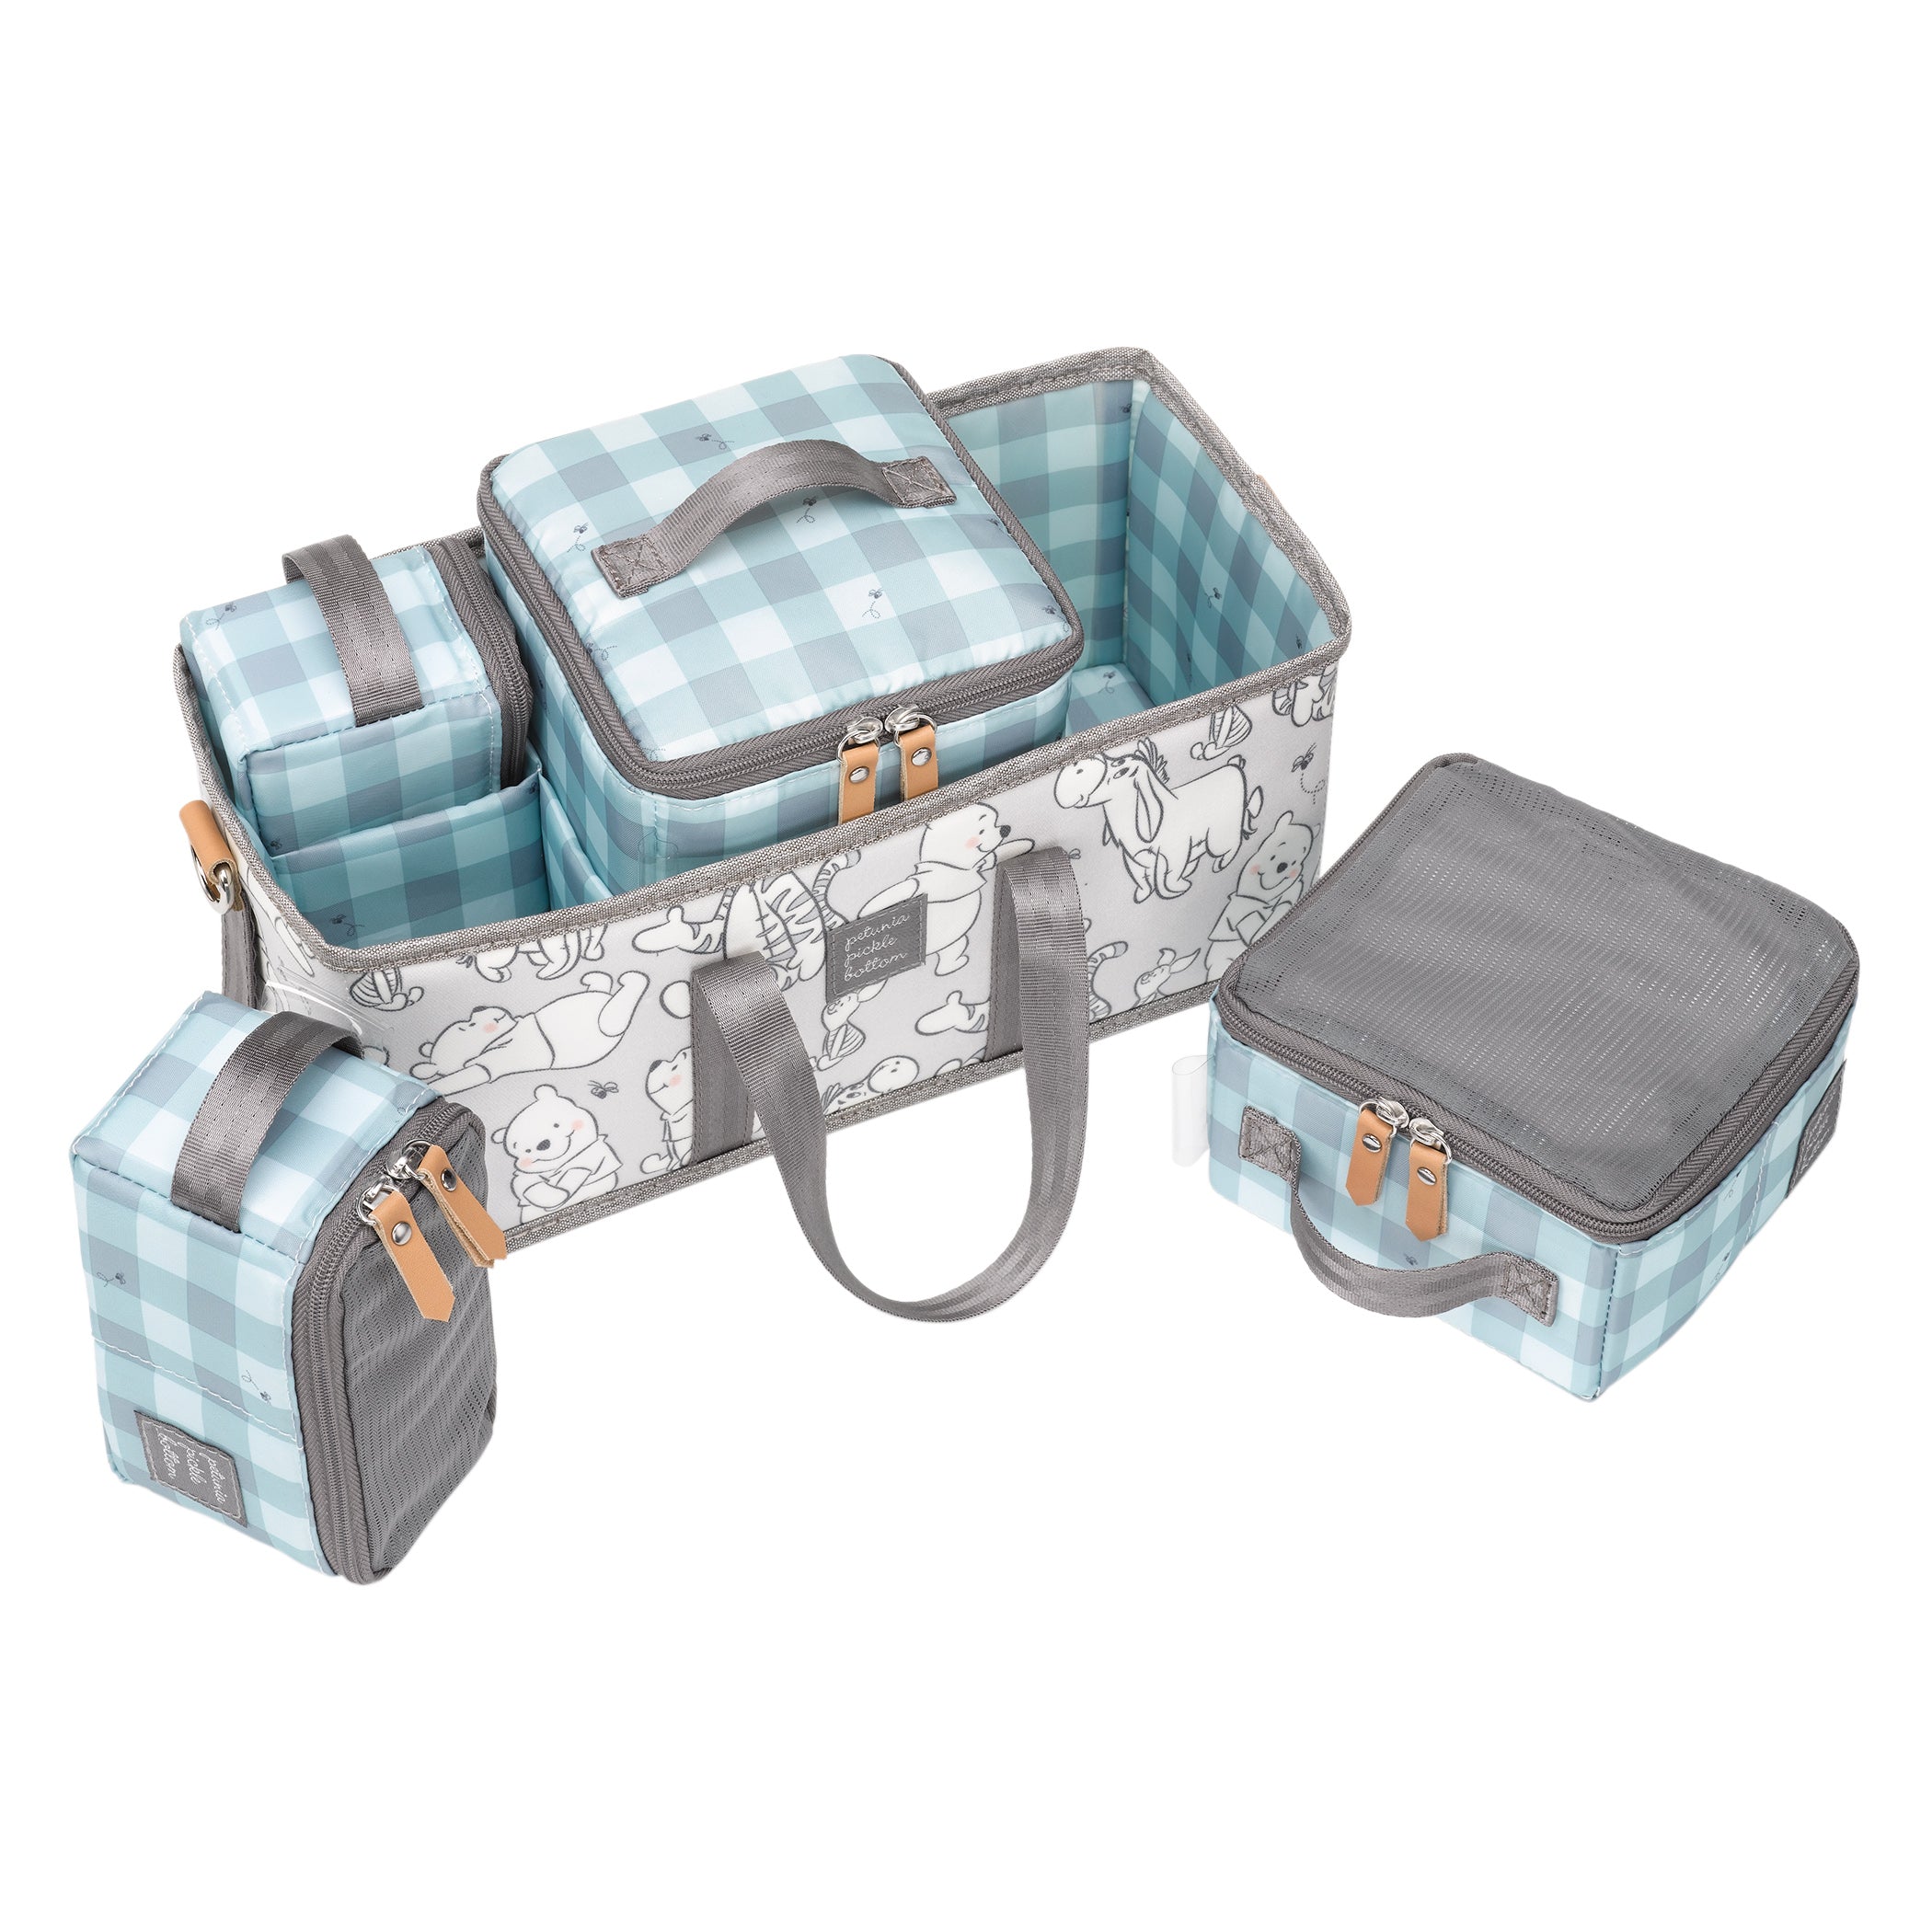 Petunia Pickle Bottom Inter-Mix Deluxe Kit in Disney's Playful Pooh Diaper Caddie